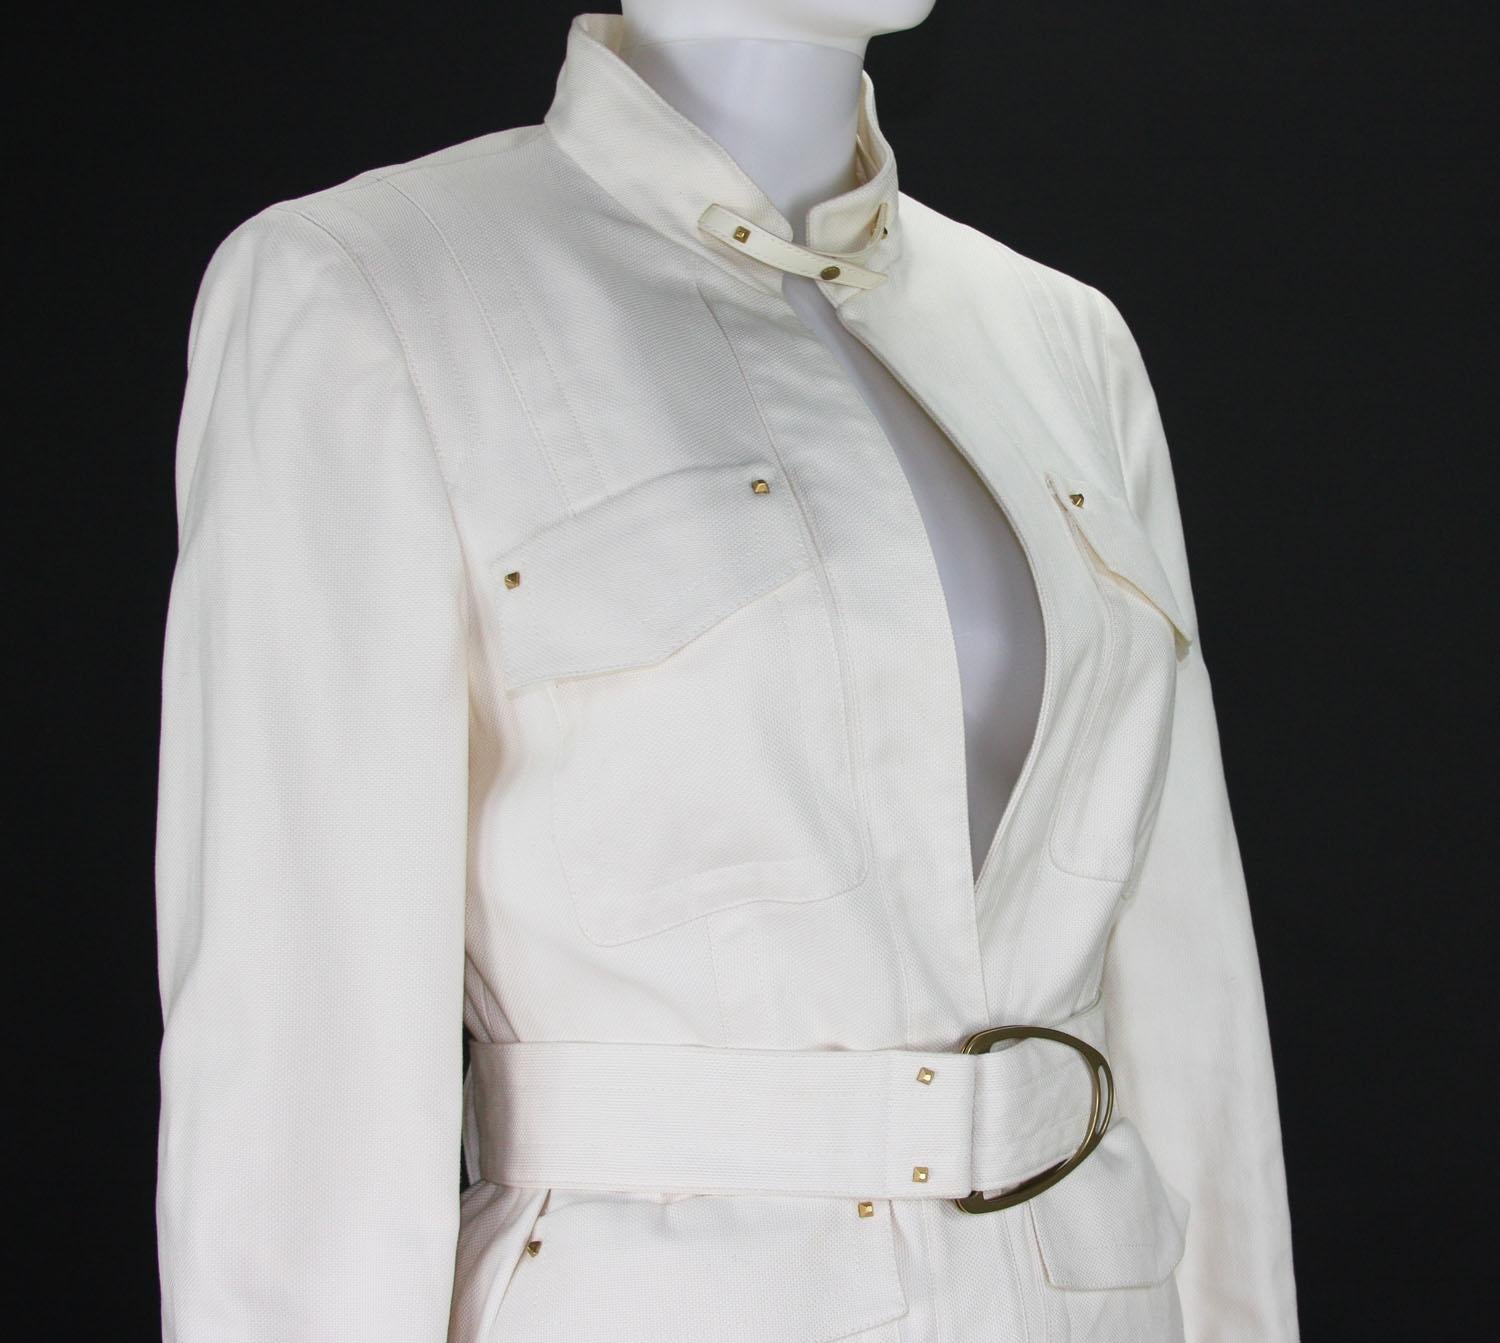 Tom Ford for Gucci 2003 Collection Safari White Cotton Belted Pant Suit ...